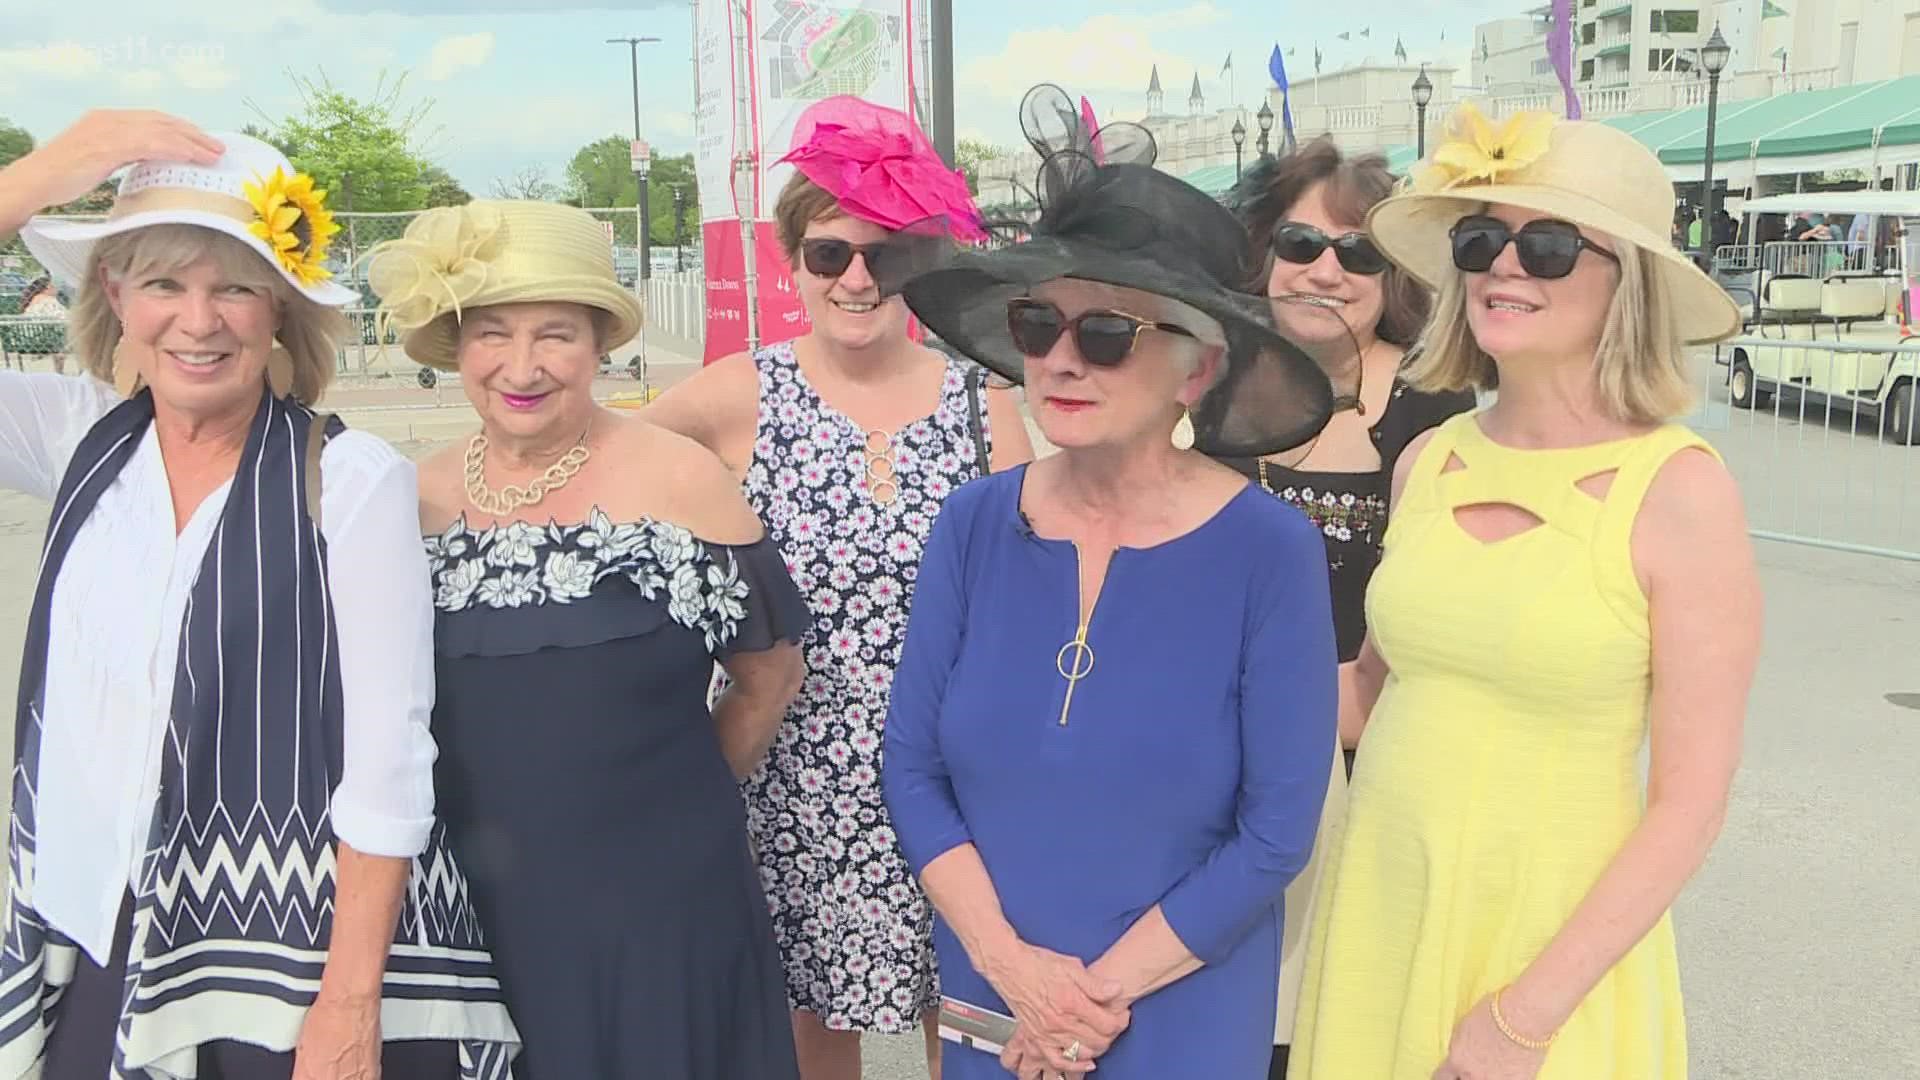 After two years of limitations due to COVID-19, fans are happy to be back at the track with plenty of fun, fashion and horse racing.